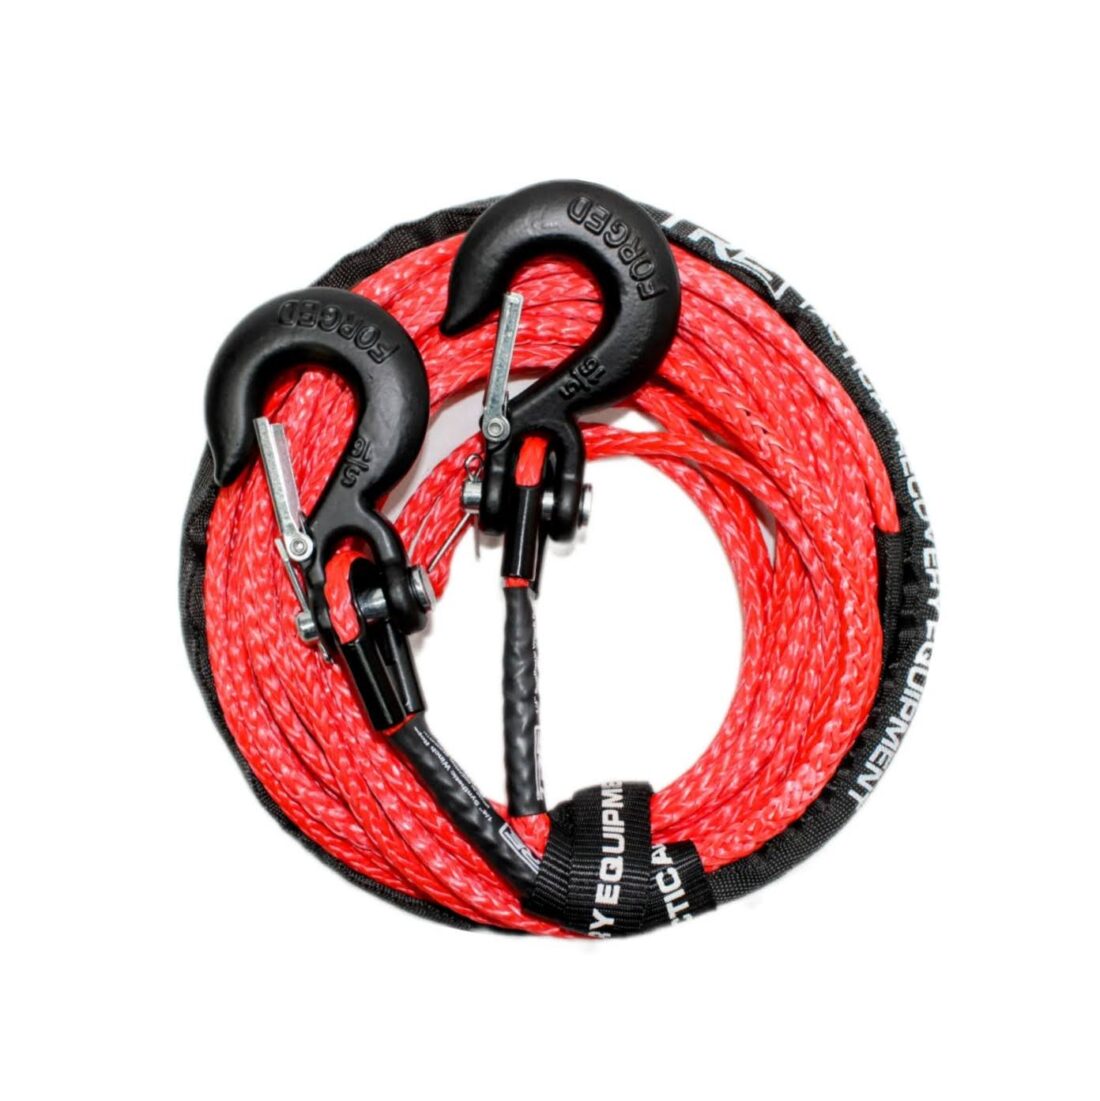 1/4" winch rope extension with optional hooks